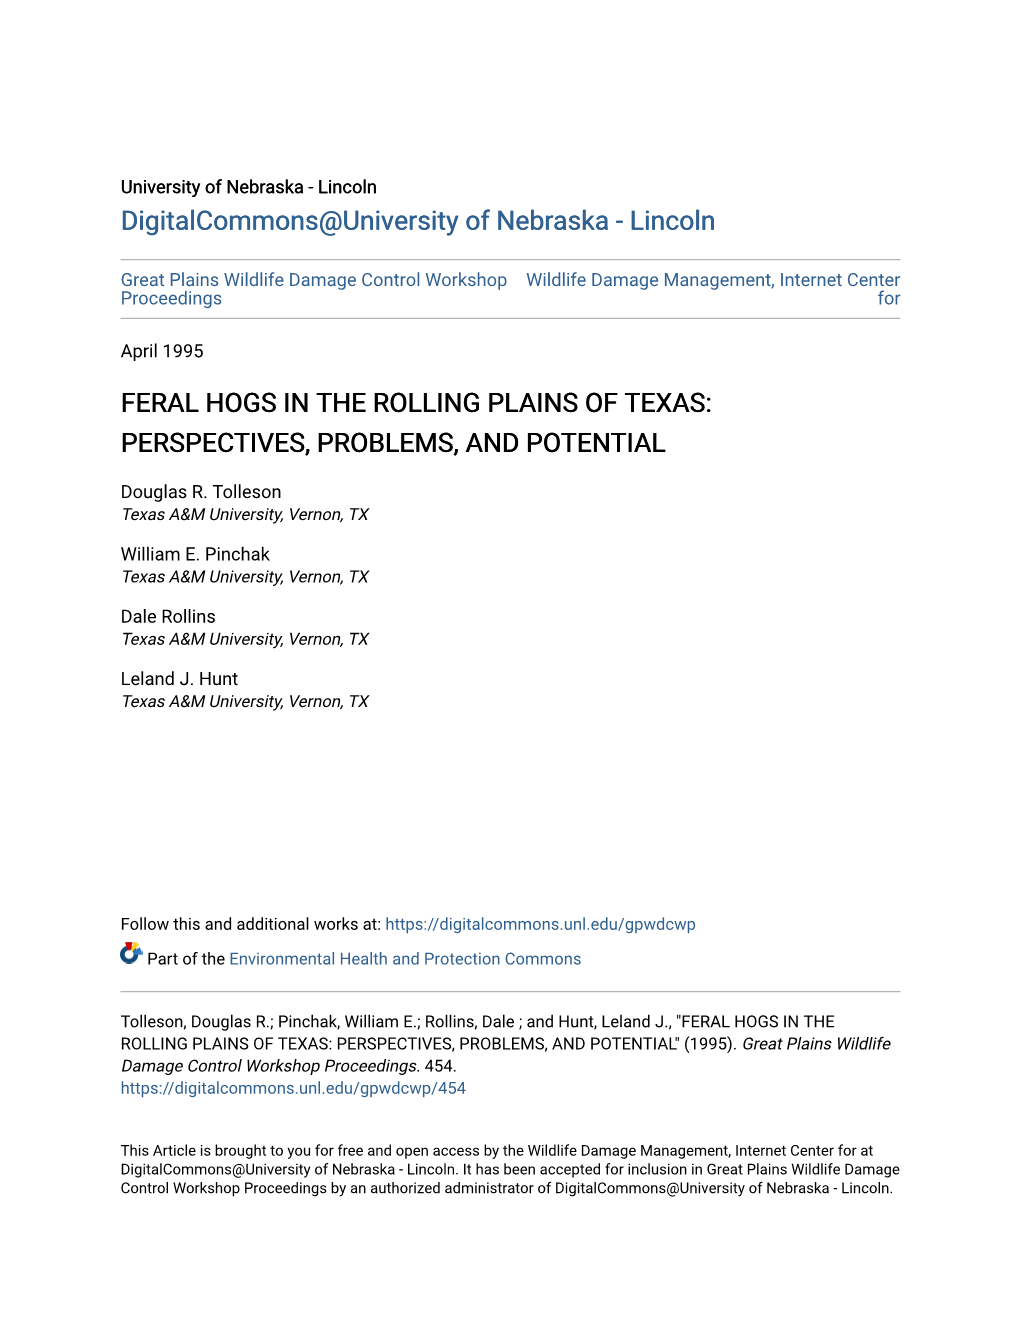 Feral Hogs in the Rolling Plains of Texas: Perspectives, Problems, and Potential